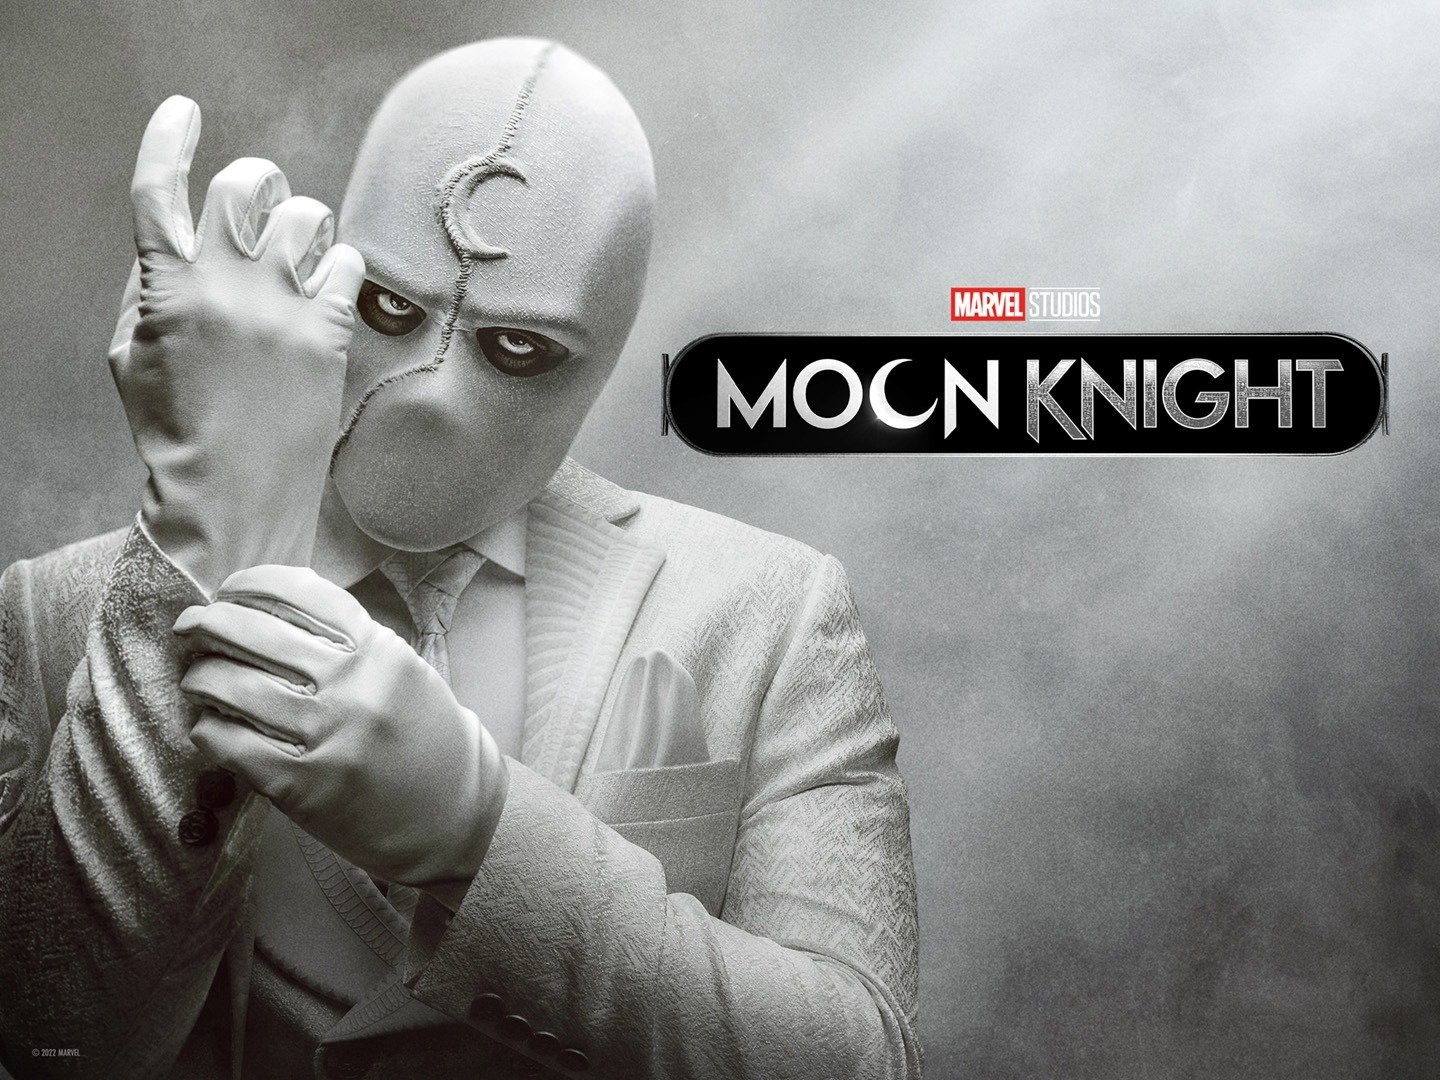 Moon Knight Is Officially Certified Fresh On Rotten Tomatoes